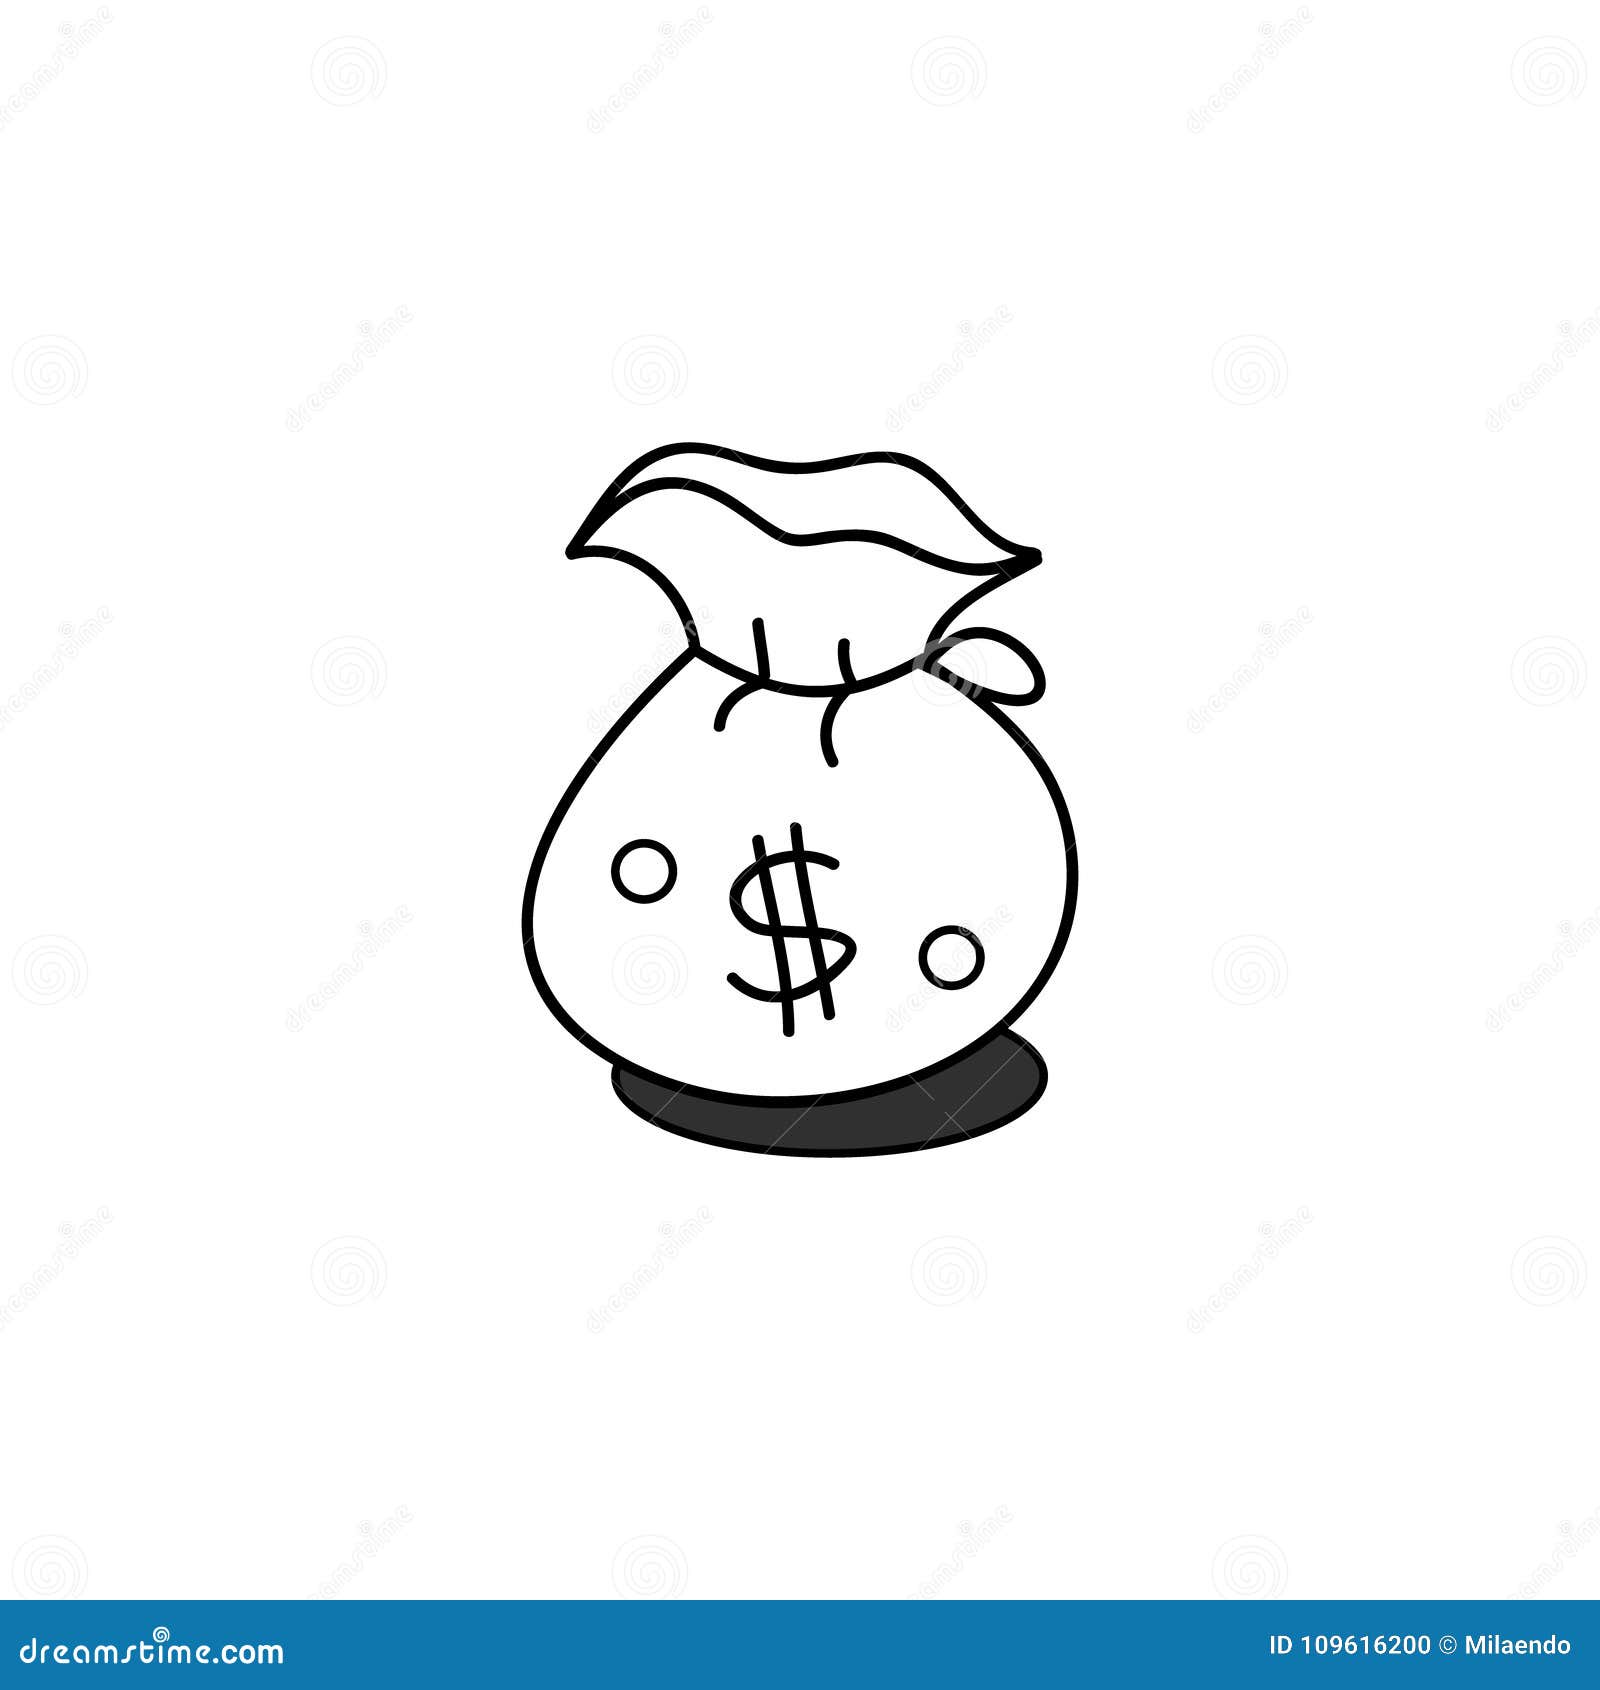 Money bag icon outline stock vector. Illustration of pound - 109616200